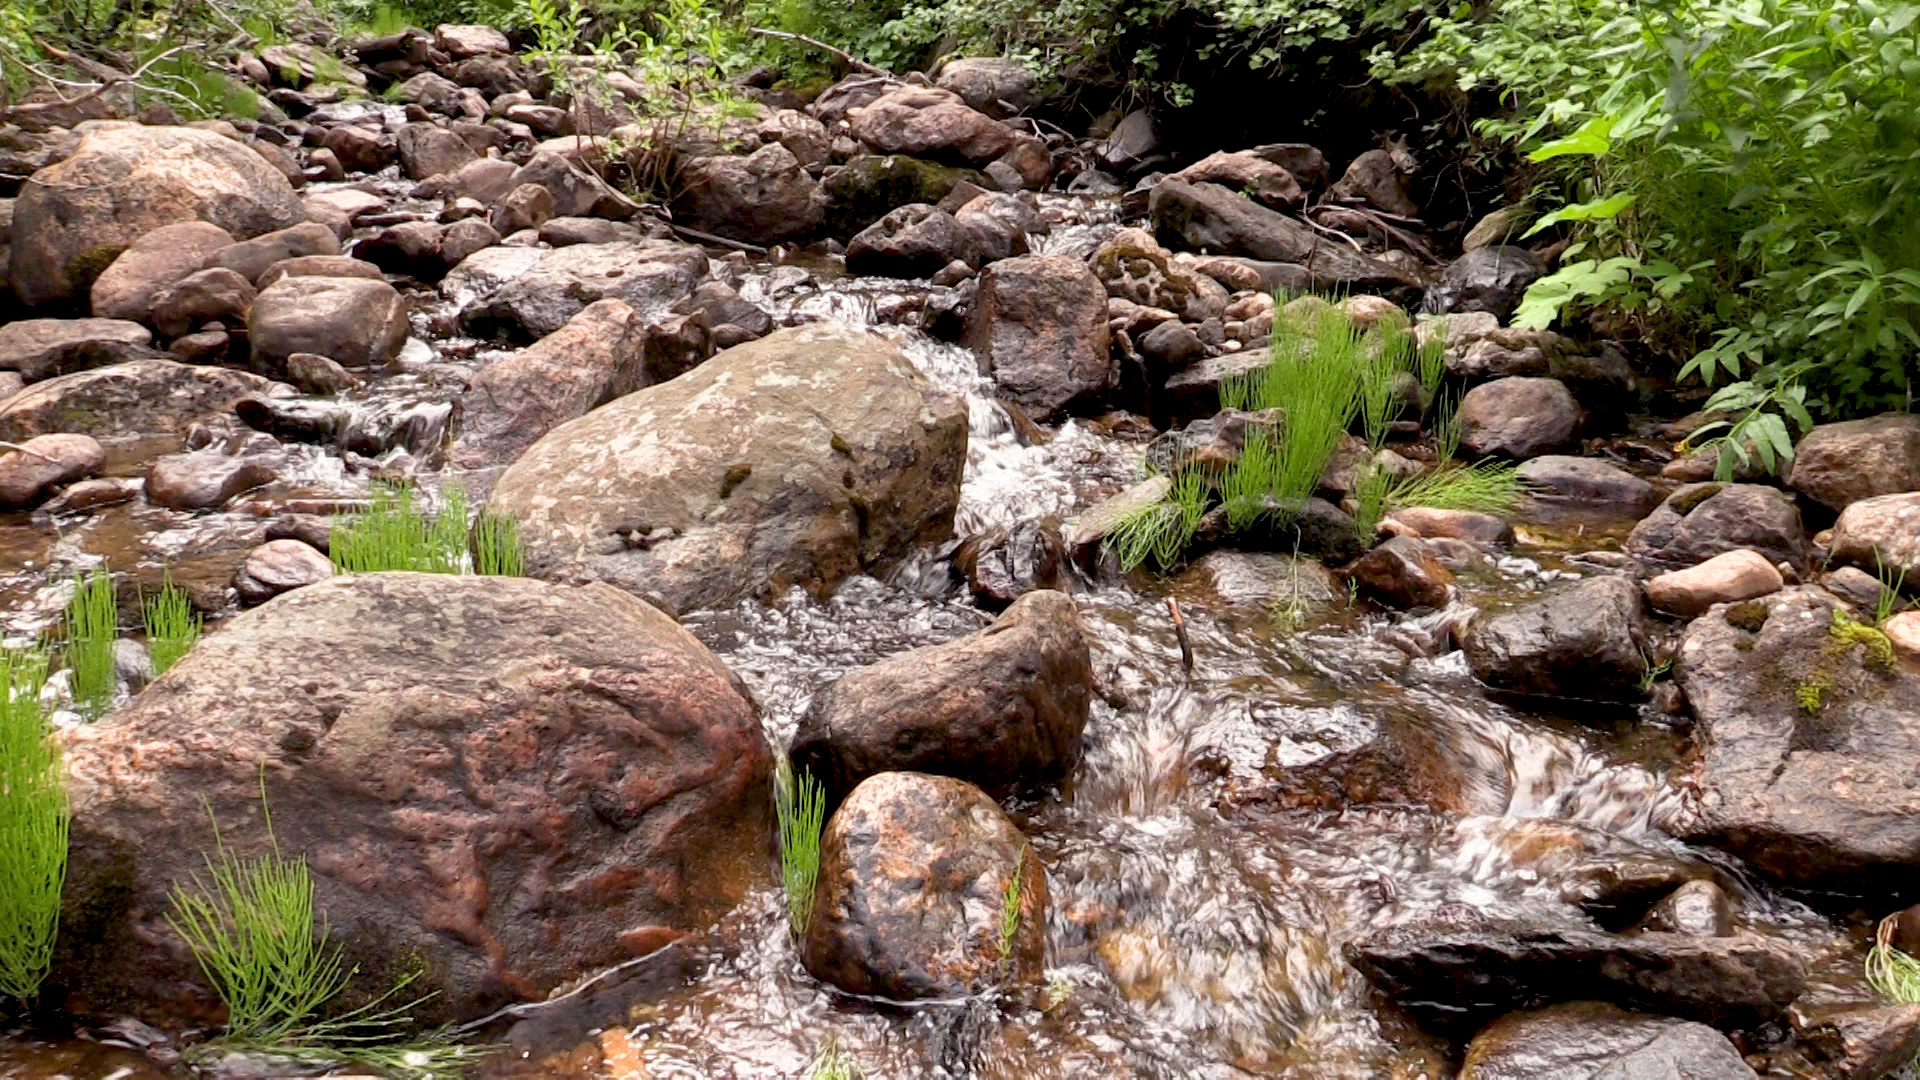 The WISE project helps protect rivers and streams on the West Slope.